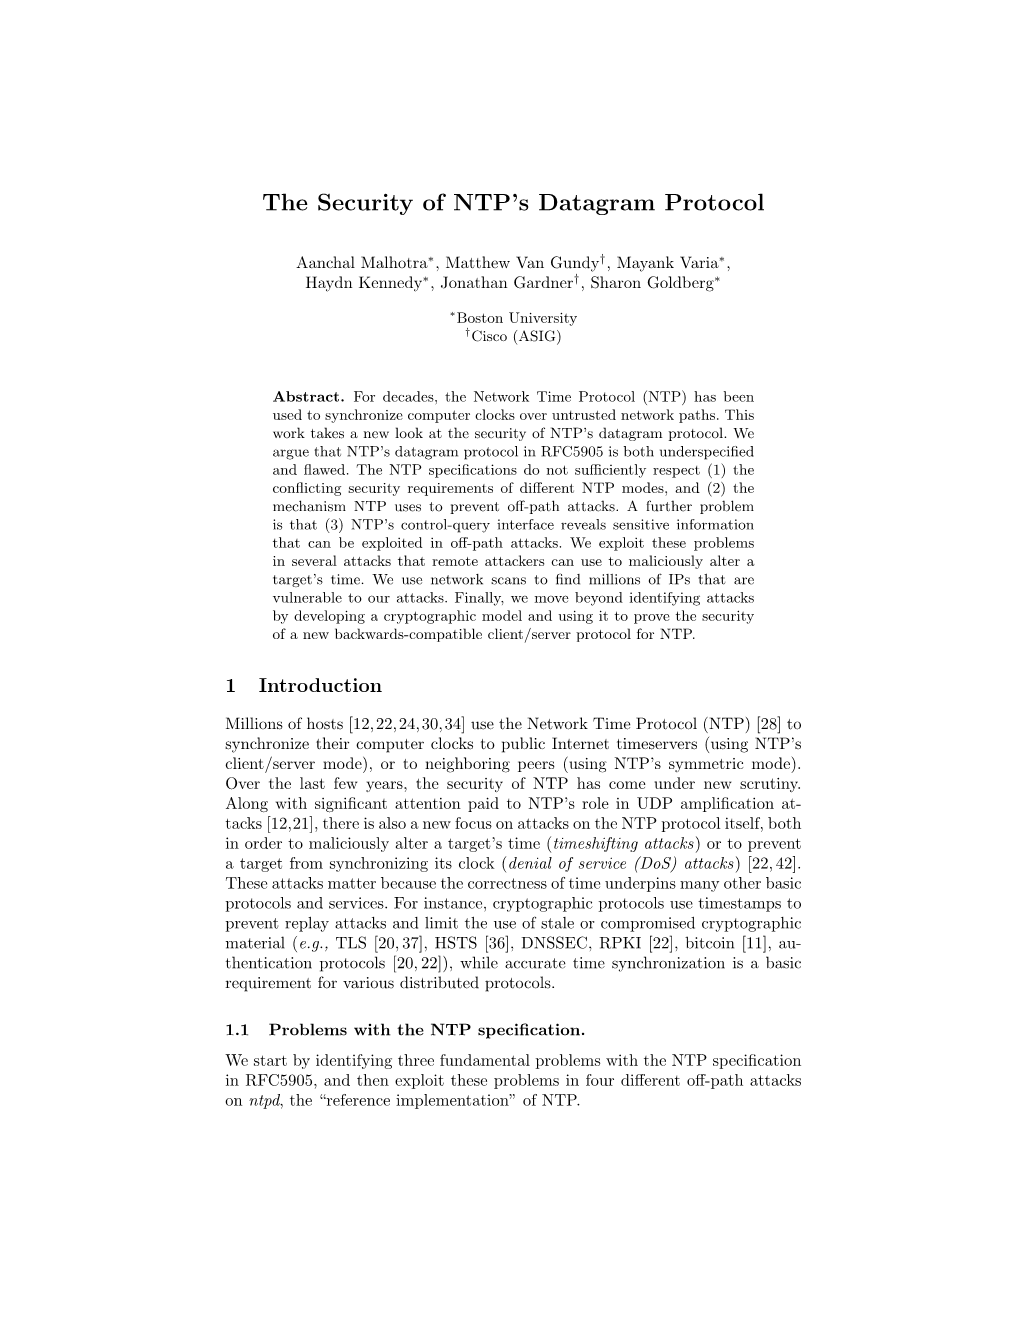 The Security of NTP's Datagram Protocol